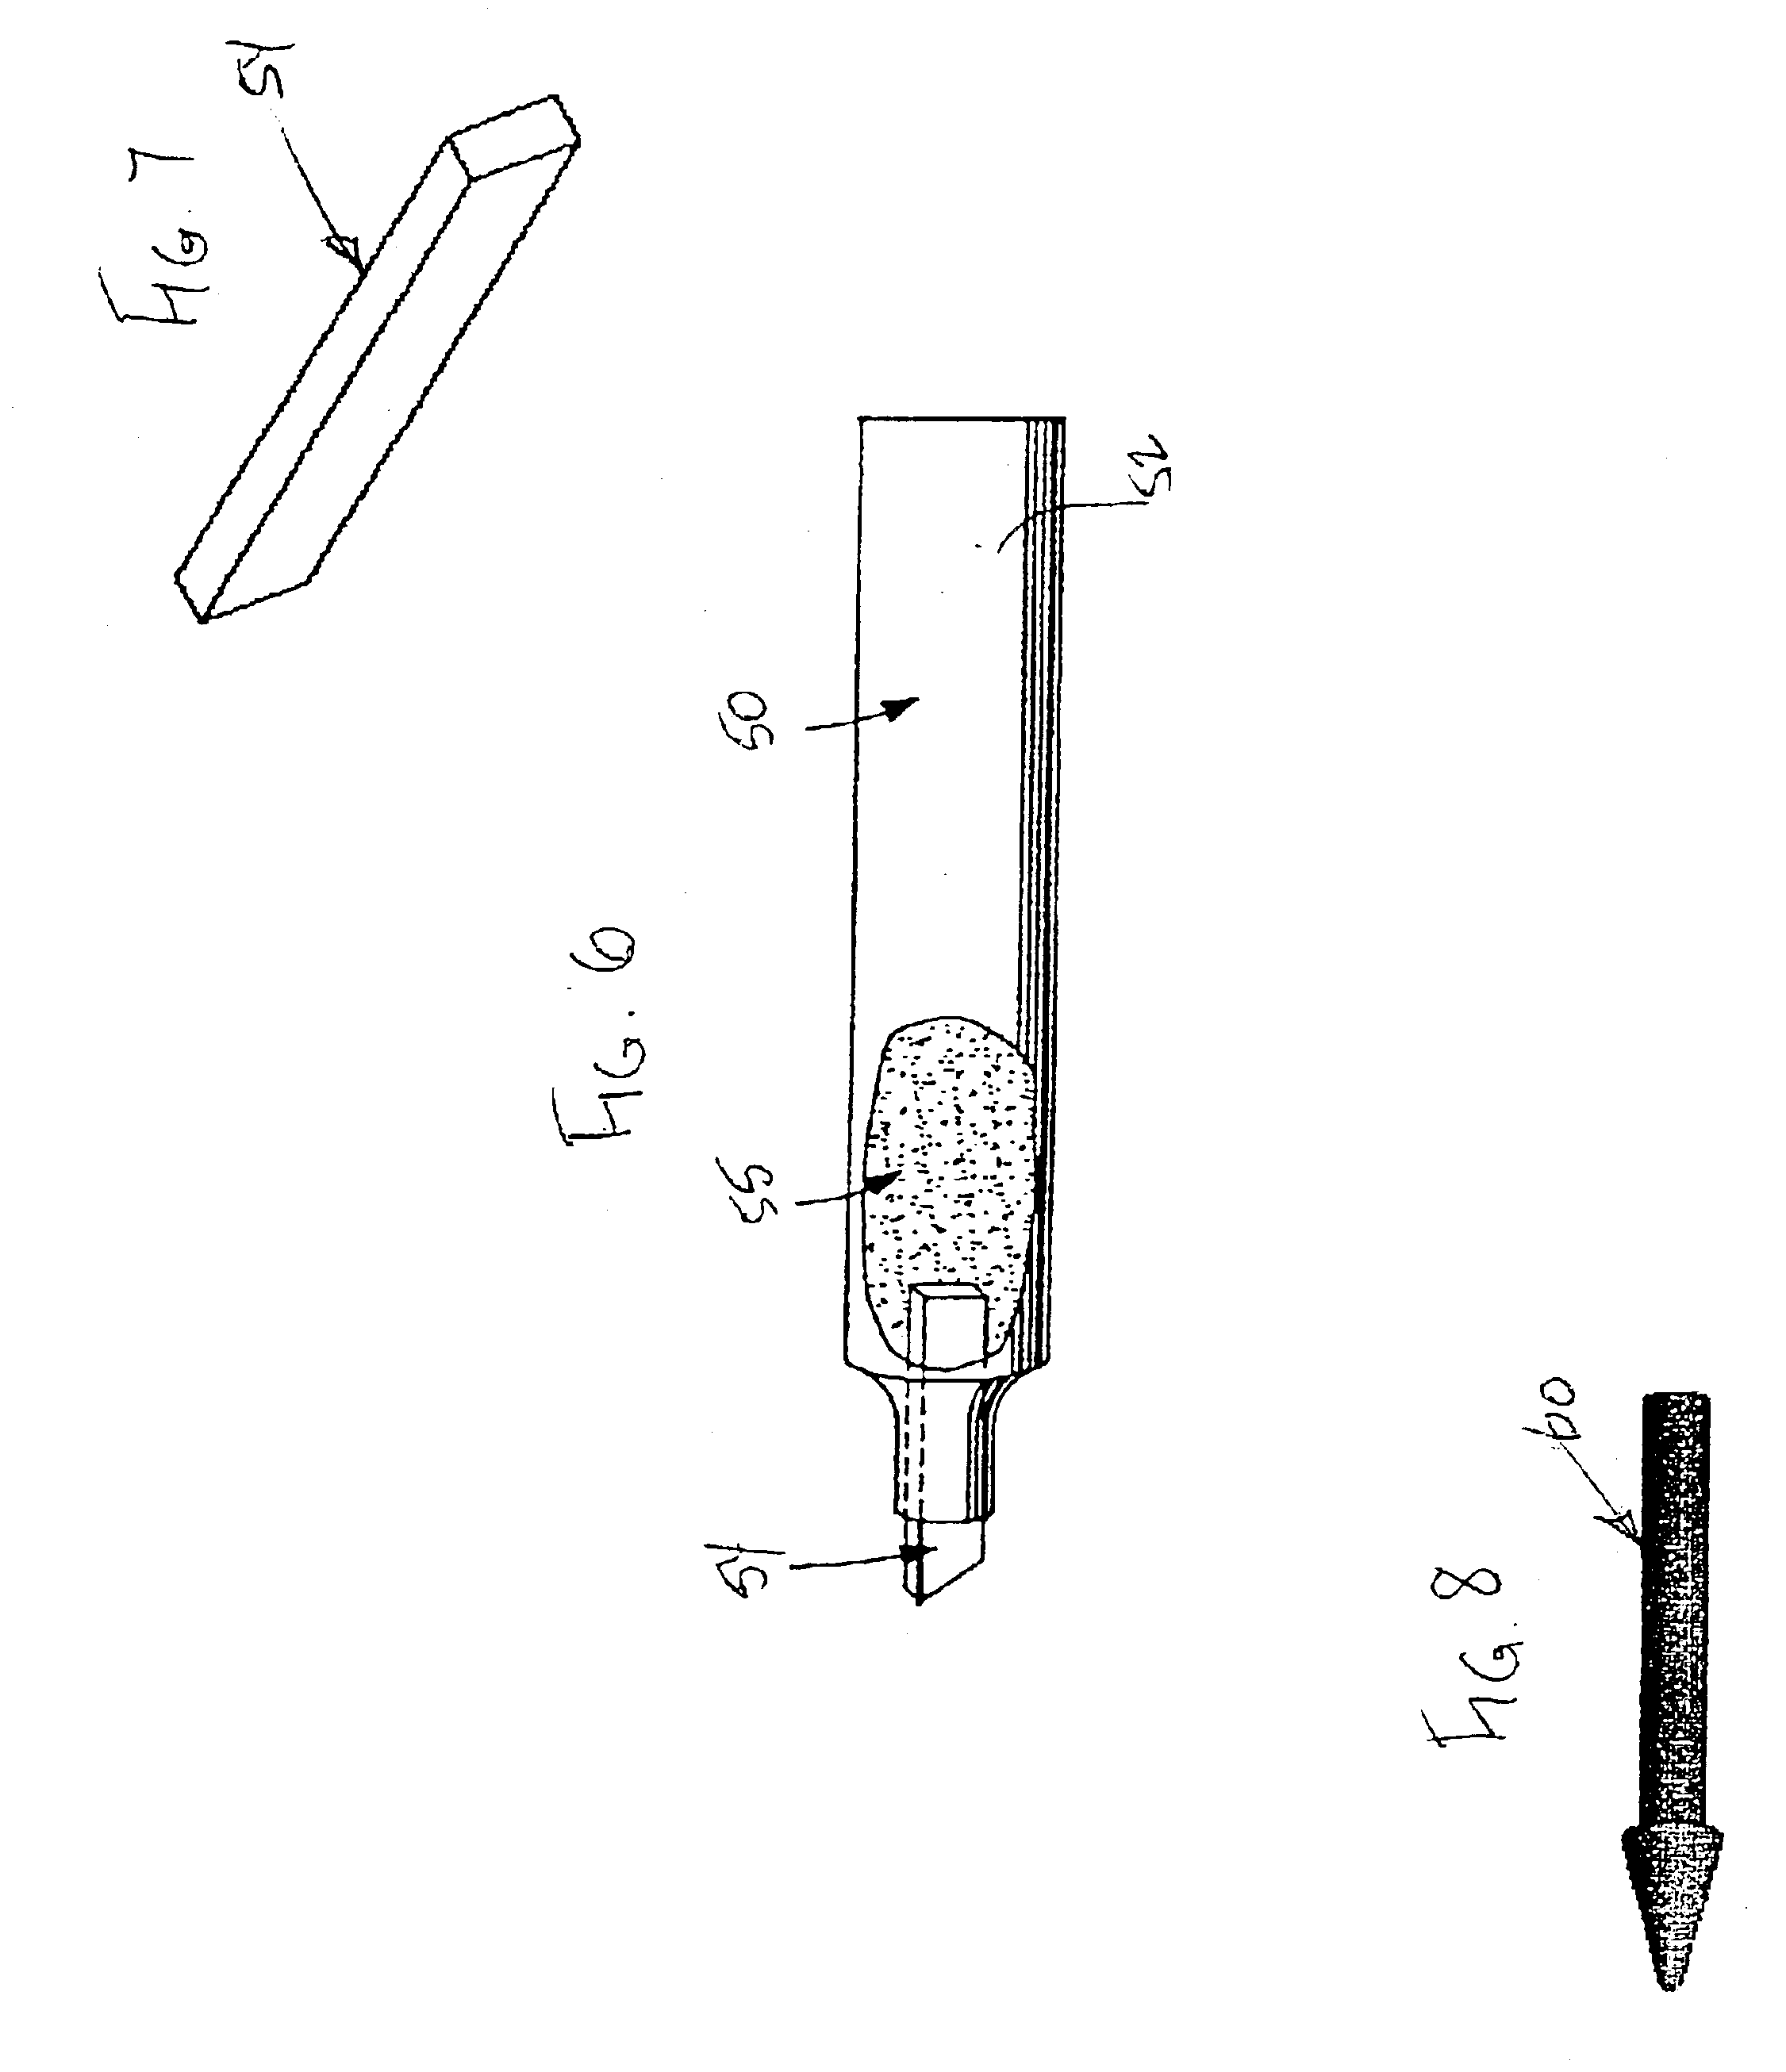 Method and apparatus for making NIBS and ink reservoirs for writing and marking instruments and the resultant products